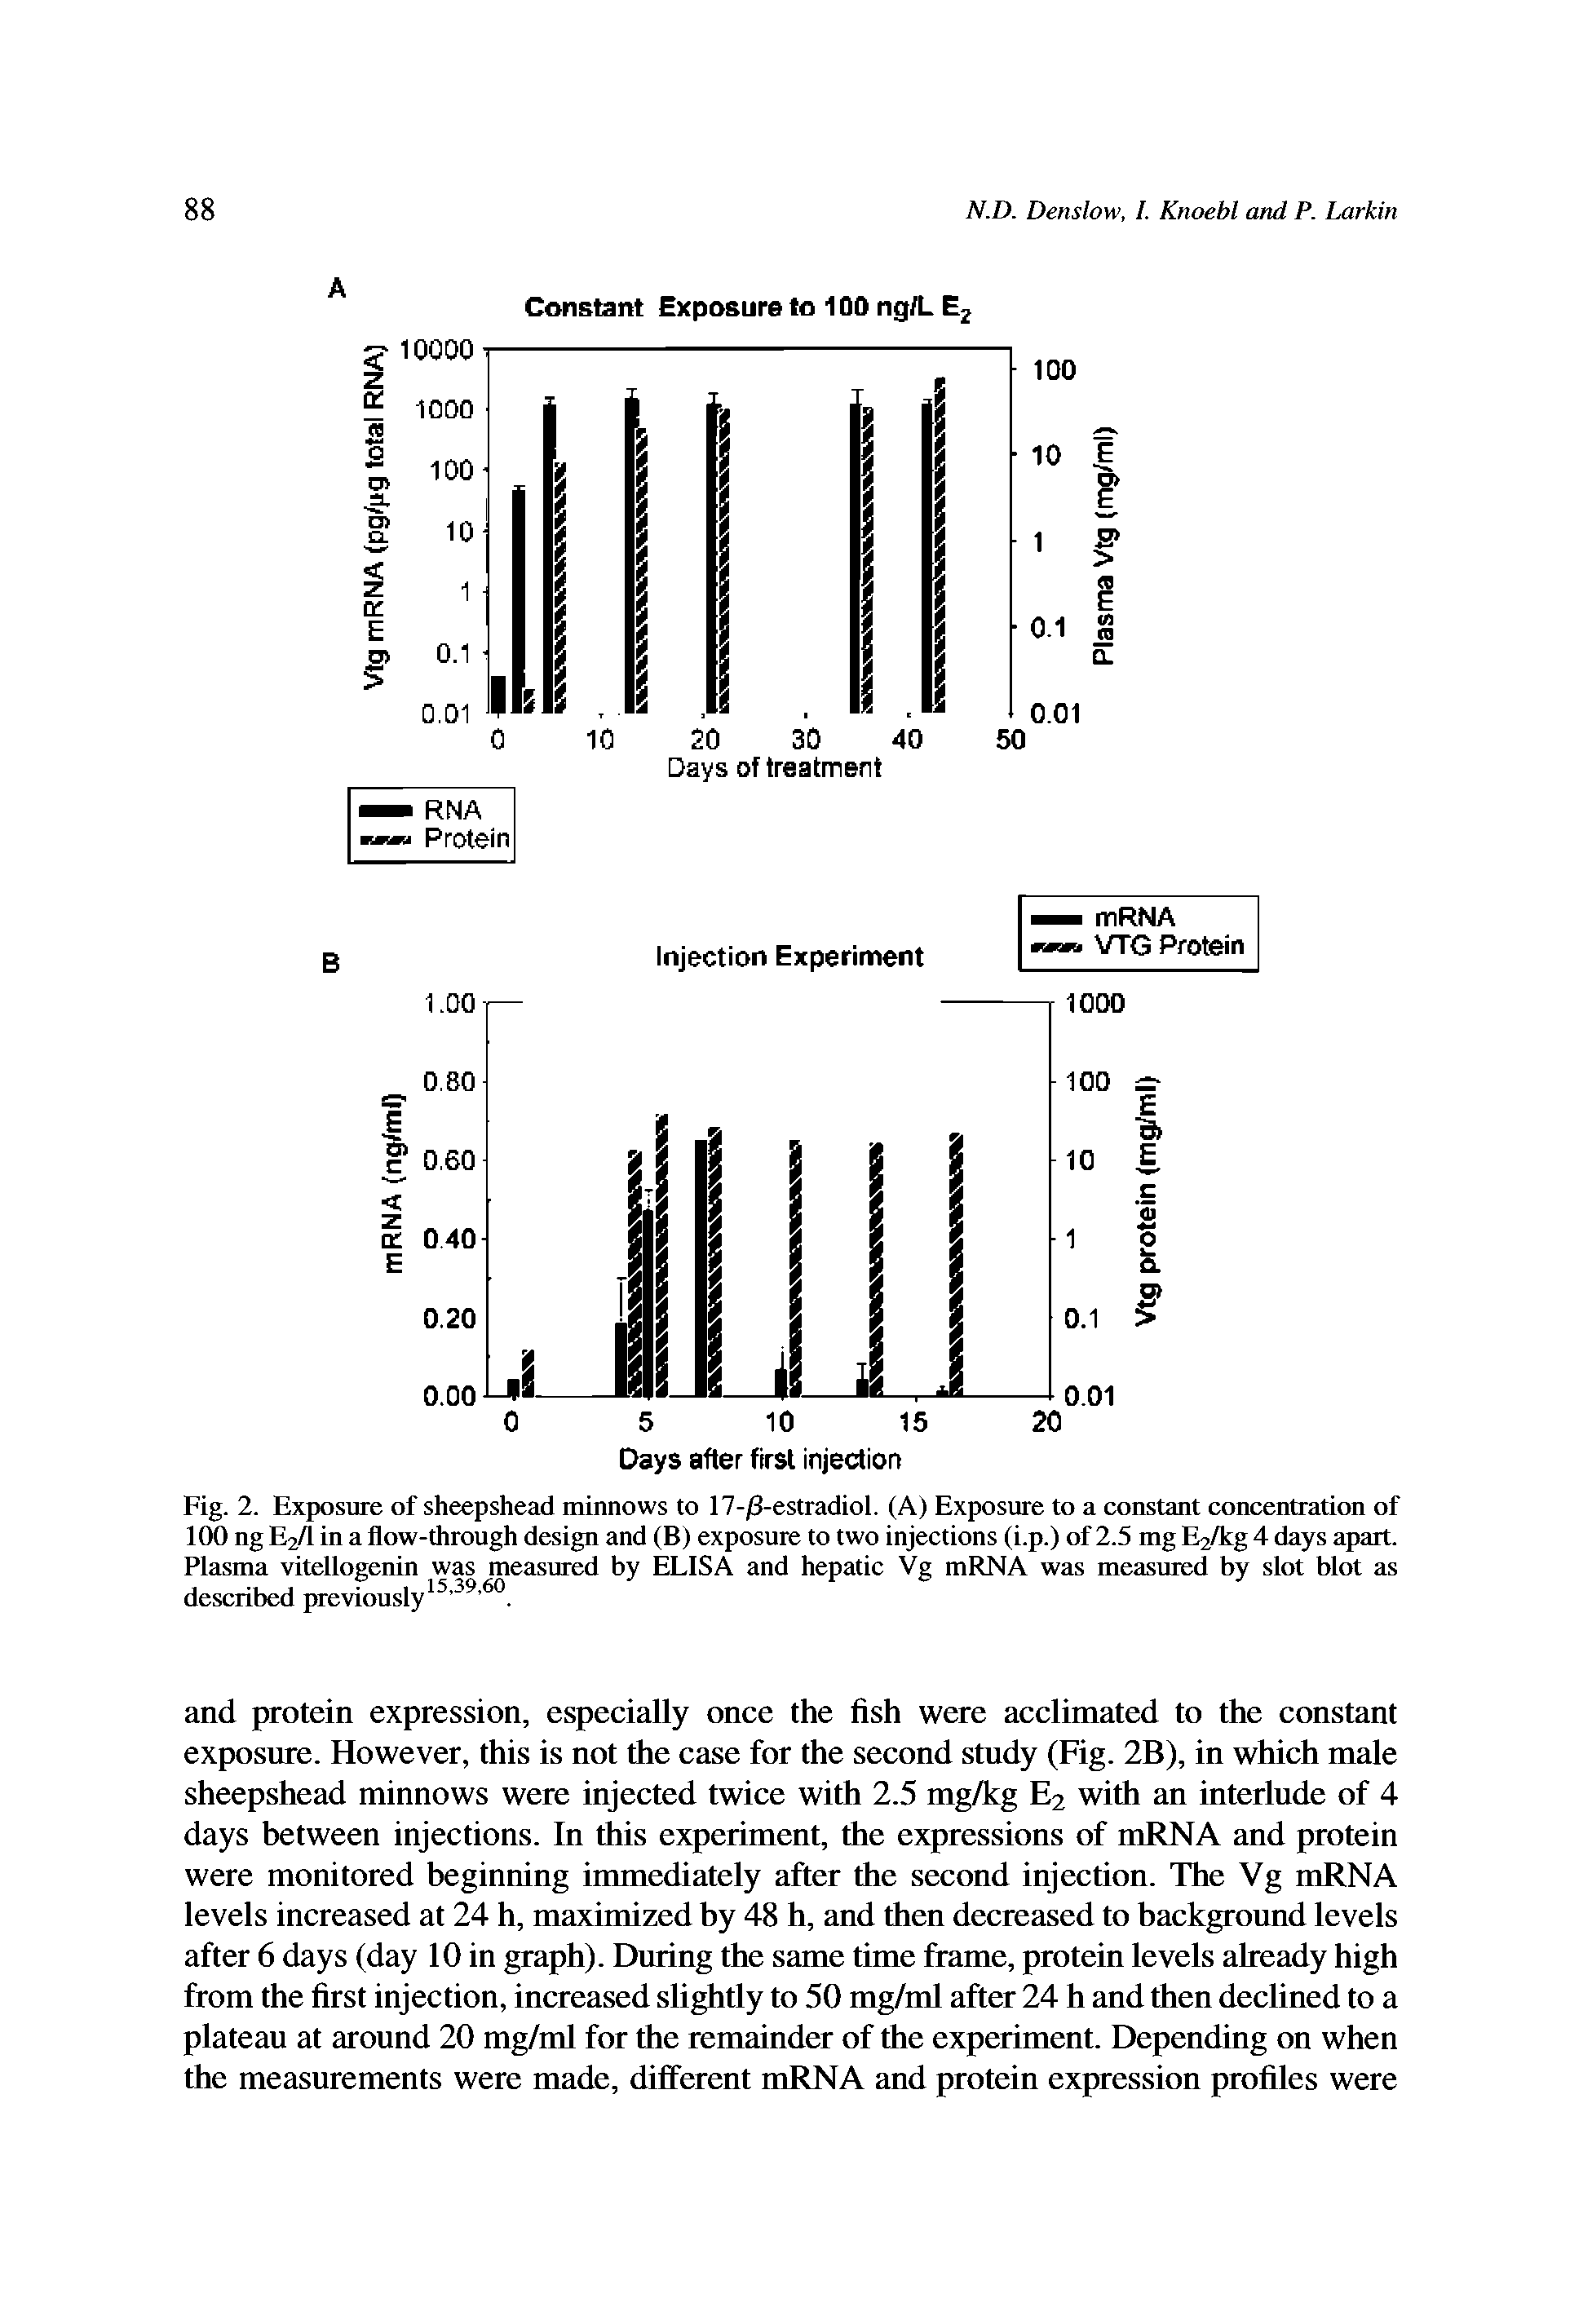 Fig. 2. Exposure of sheepshead minnows to 17-/3-estradiol. (A) Exposure to a constant concentration of 100 ng E2/l in a flow-through design and (B) exposure to two injections (i.p.) of 2.5 mg E2/kg 4 days apart. Plasma vitellogenin was measured by ELISA and hepatic Vg mRNA was measured by slot blot as described previously15,39,60.